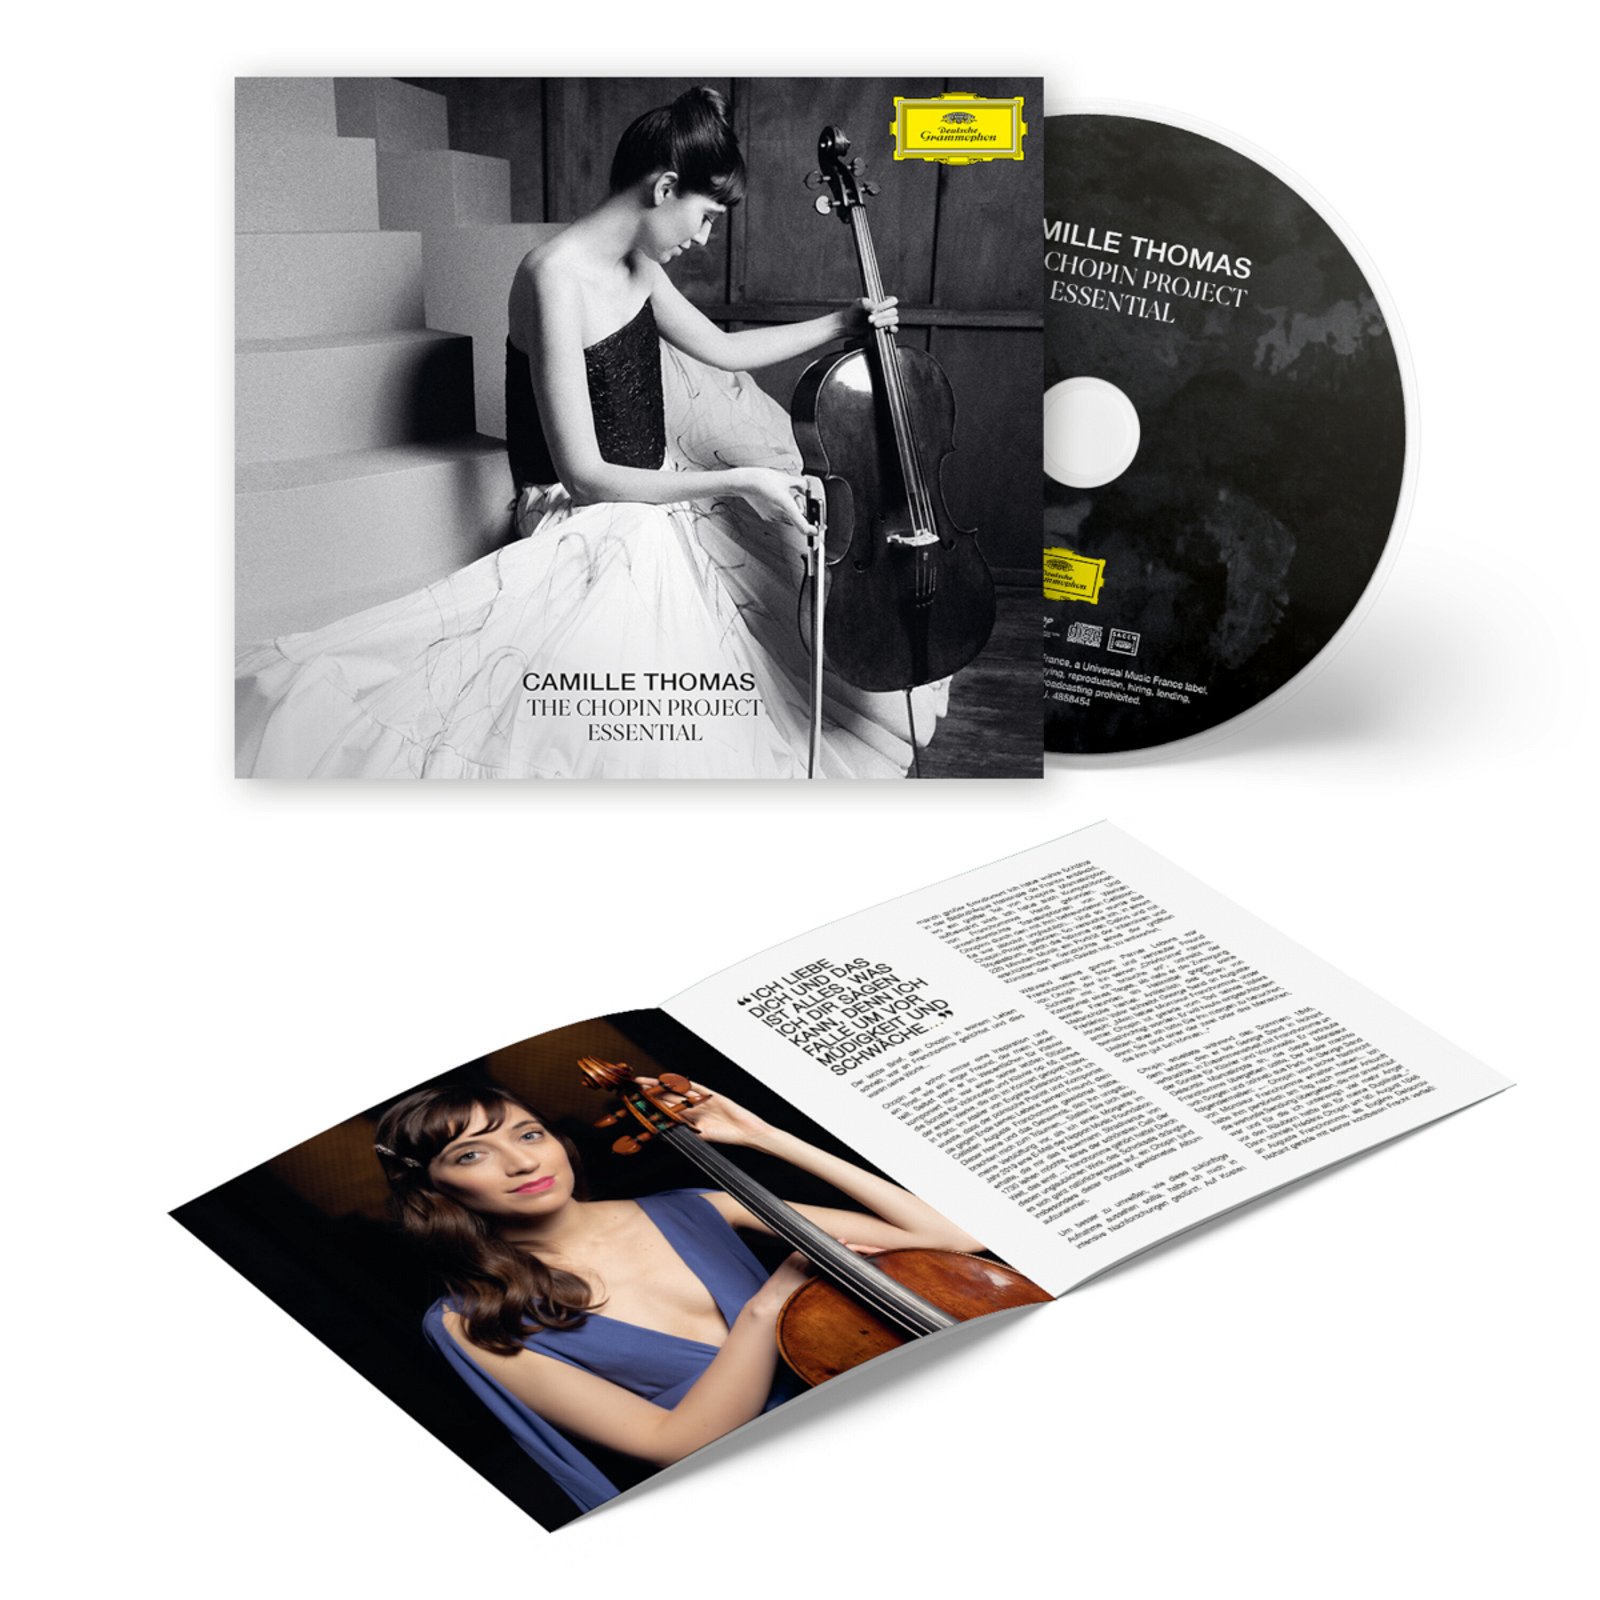 Chopin Project: Essential | Camille Thomas